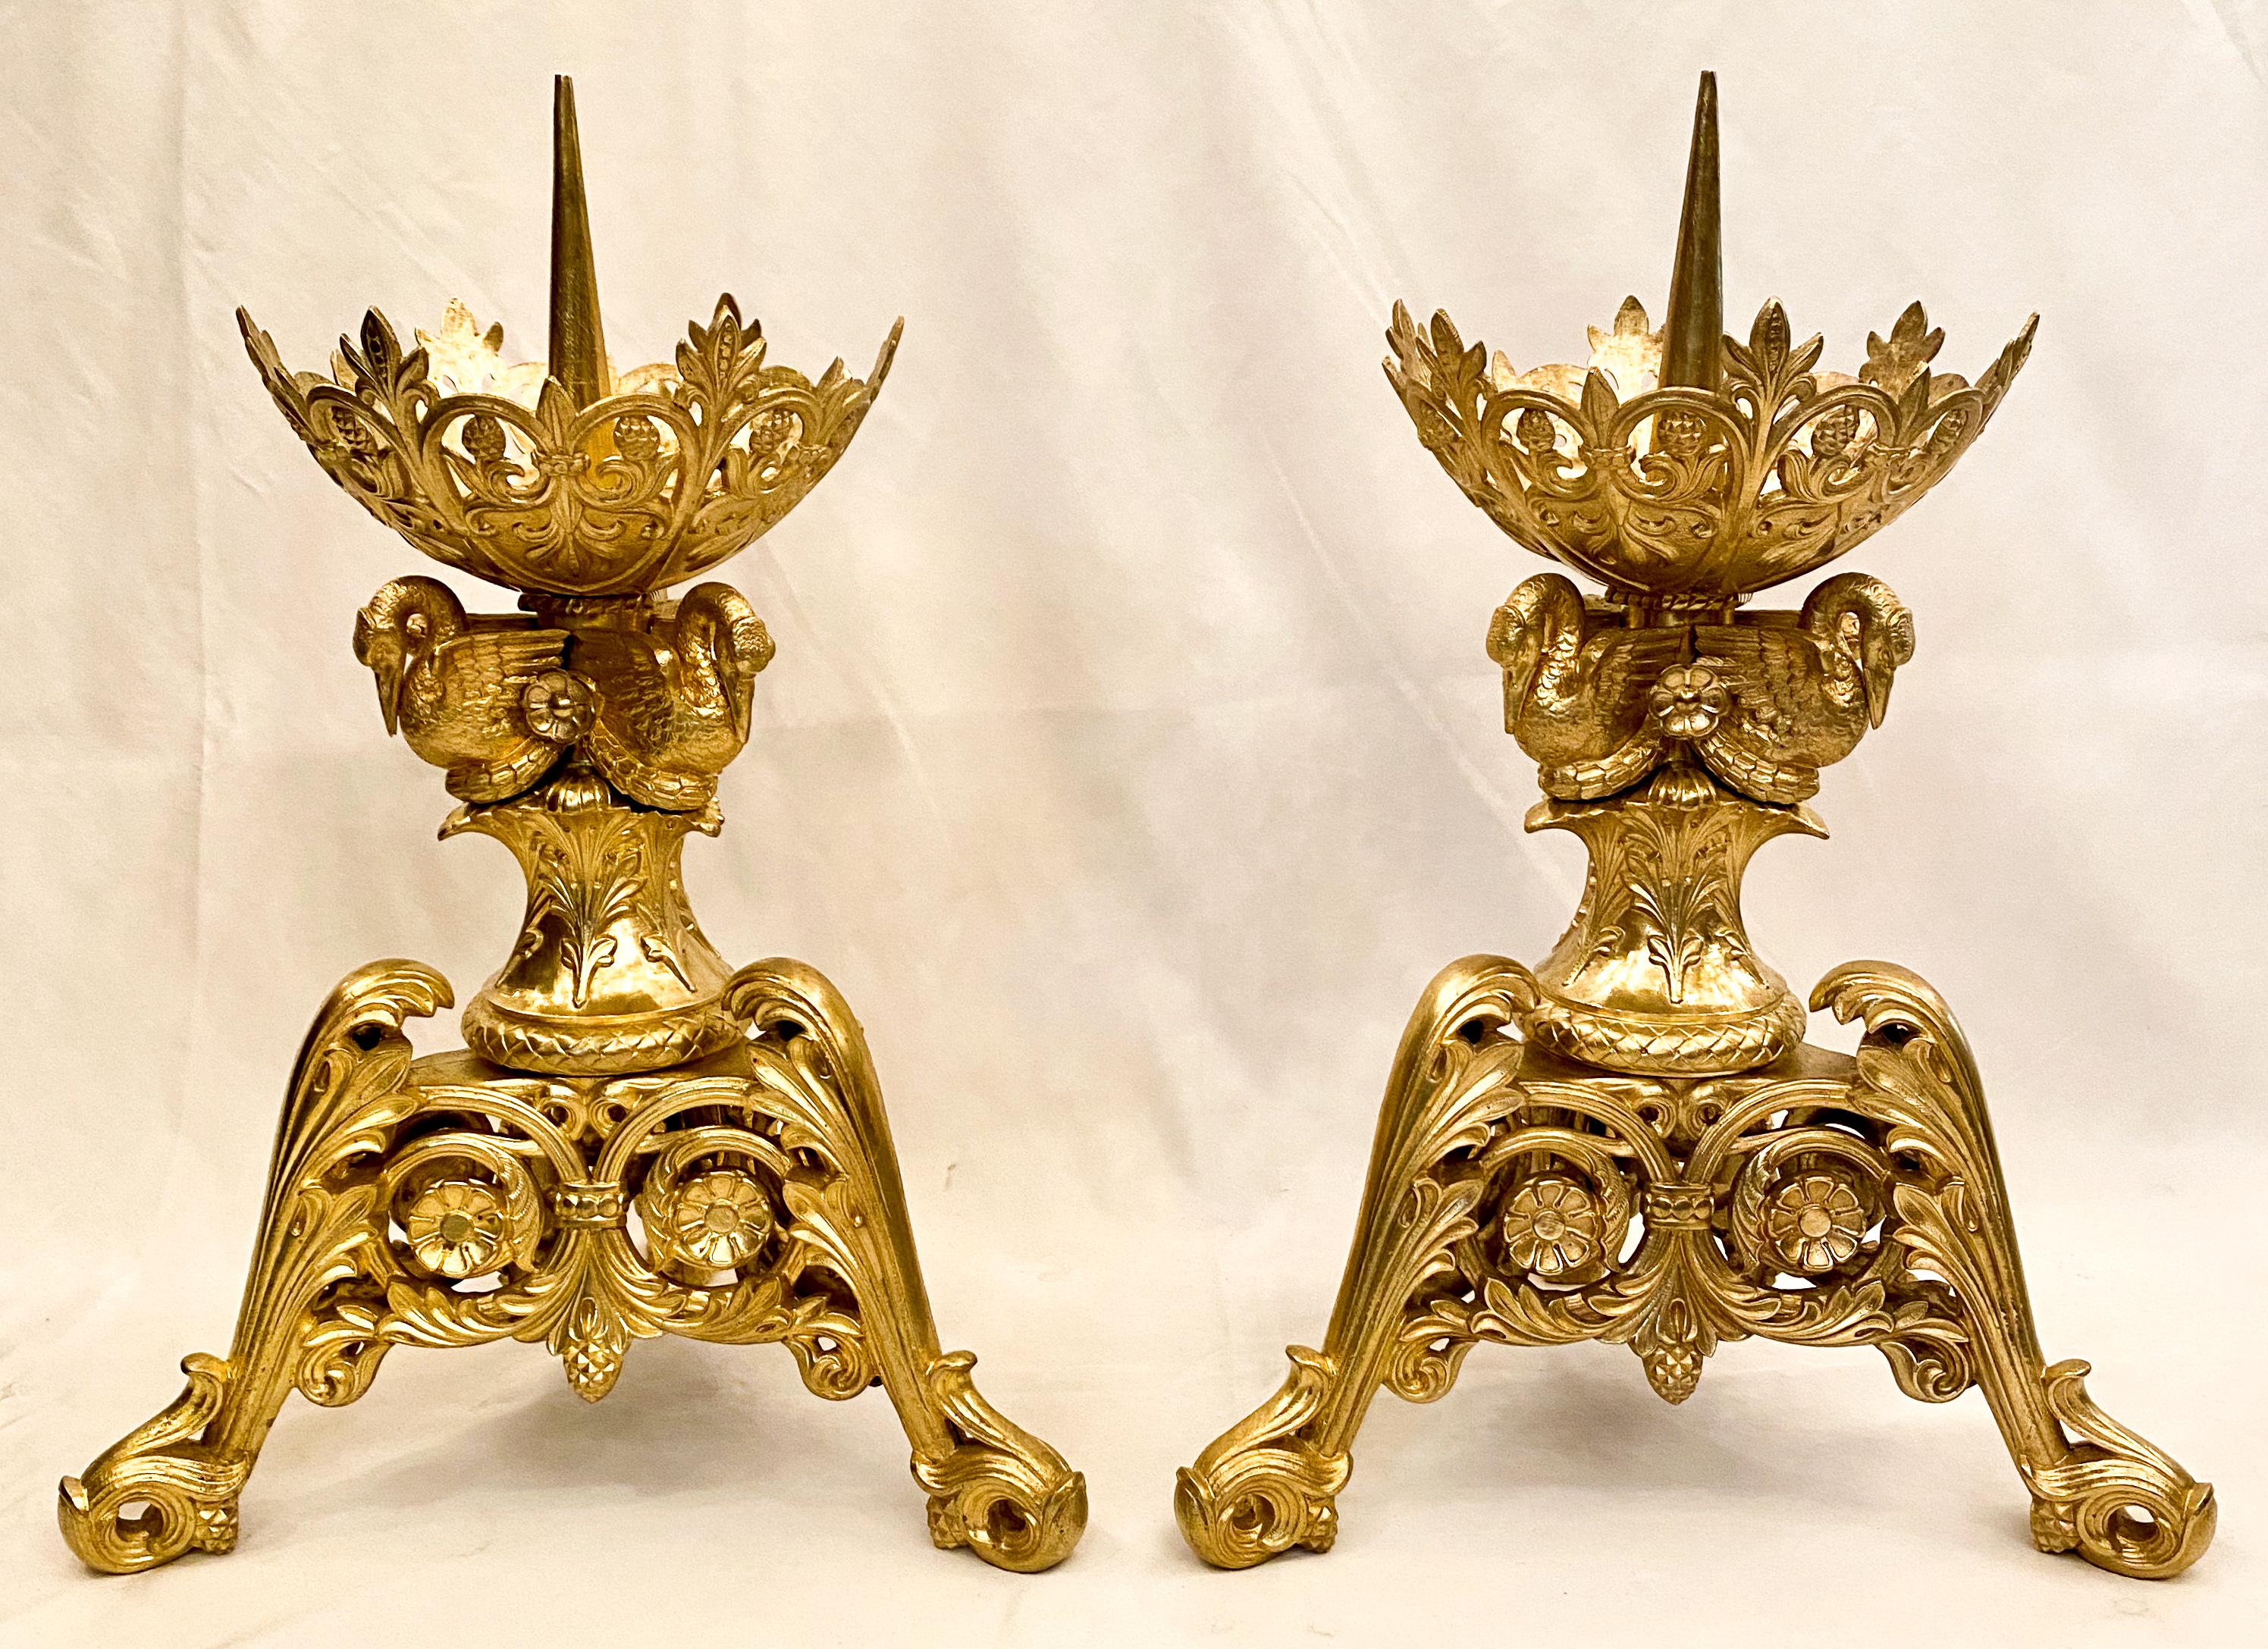 Exceptional set of 4 antique Continental bronze chateau lights, early 19th century.